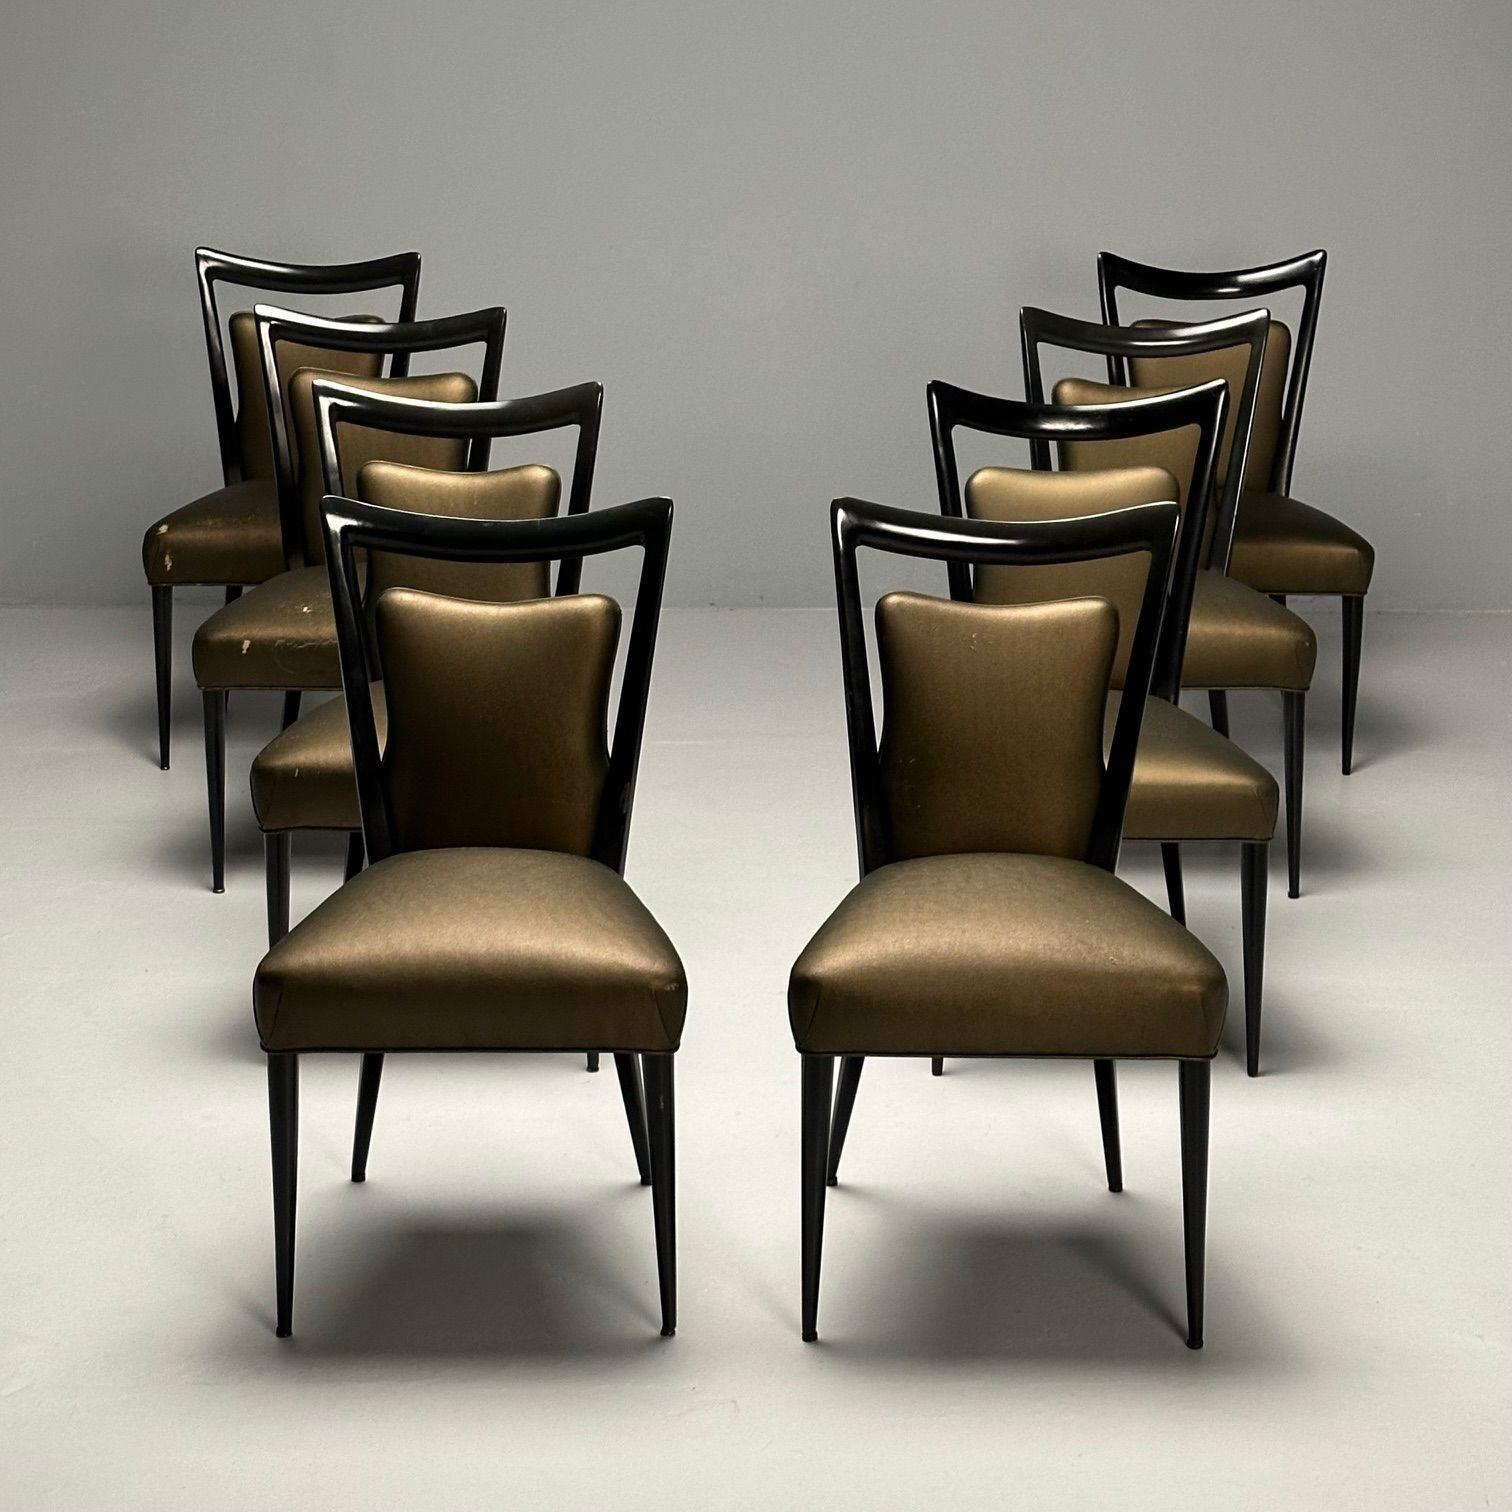 Melchiorre Bega, Italian Mid-Century Modern, Eight Dining Chairs, Black Lacquer In Good Condition For Sale In Stamford, CT